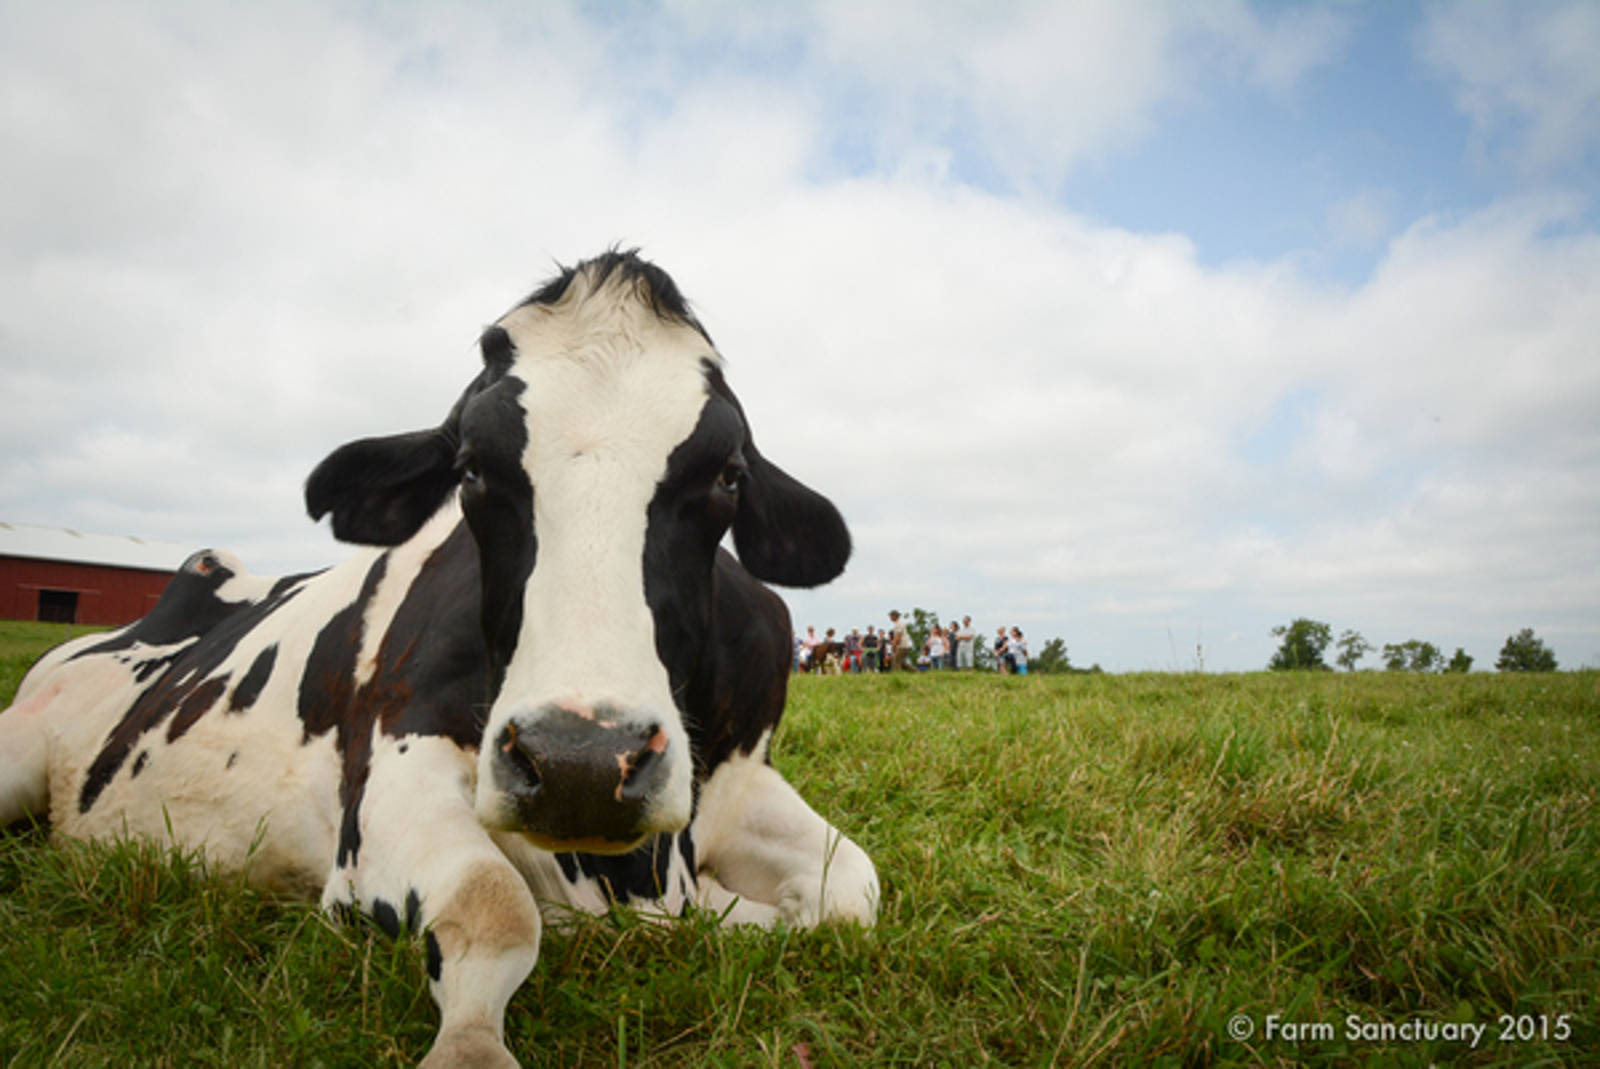 What Alexander the Rescued Veal Calf Taught Me About the Importance of Compassion